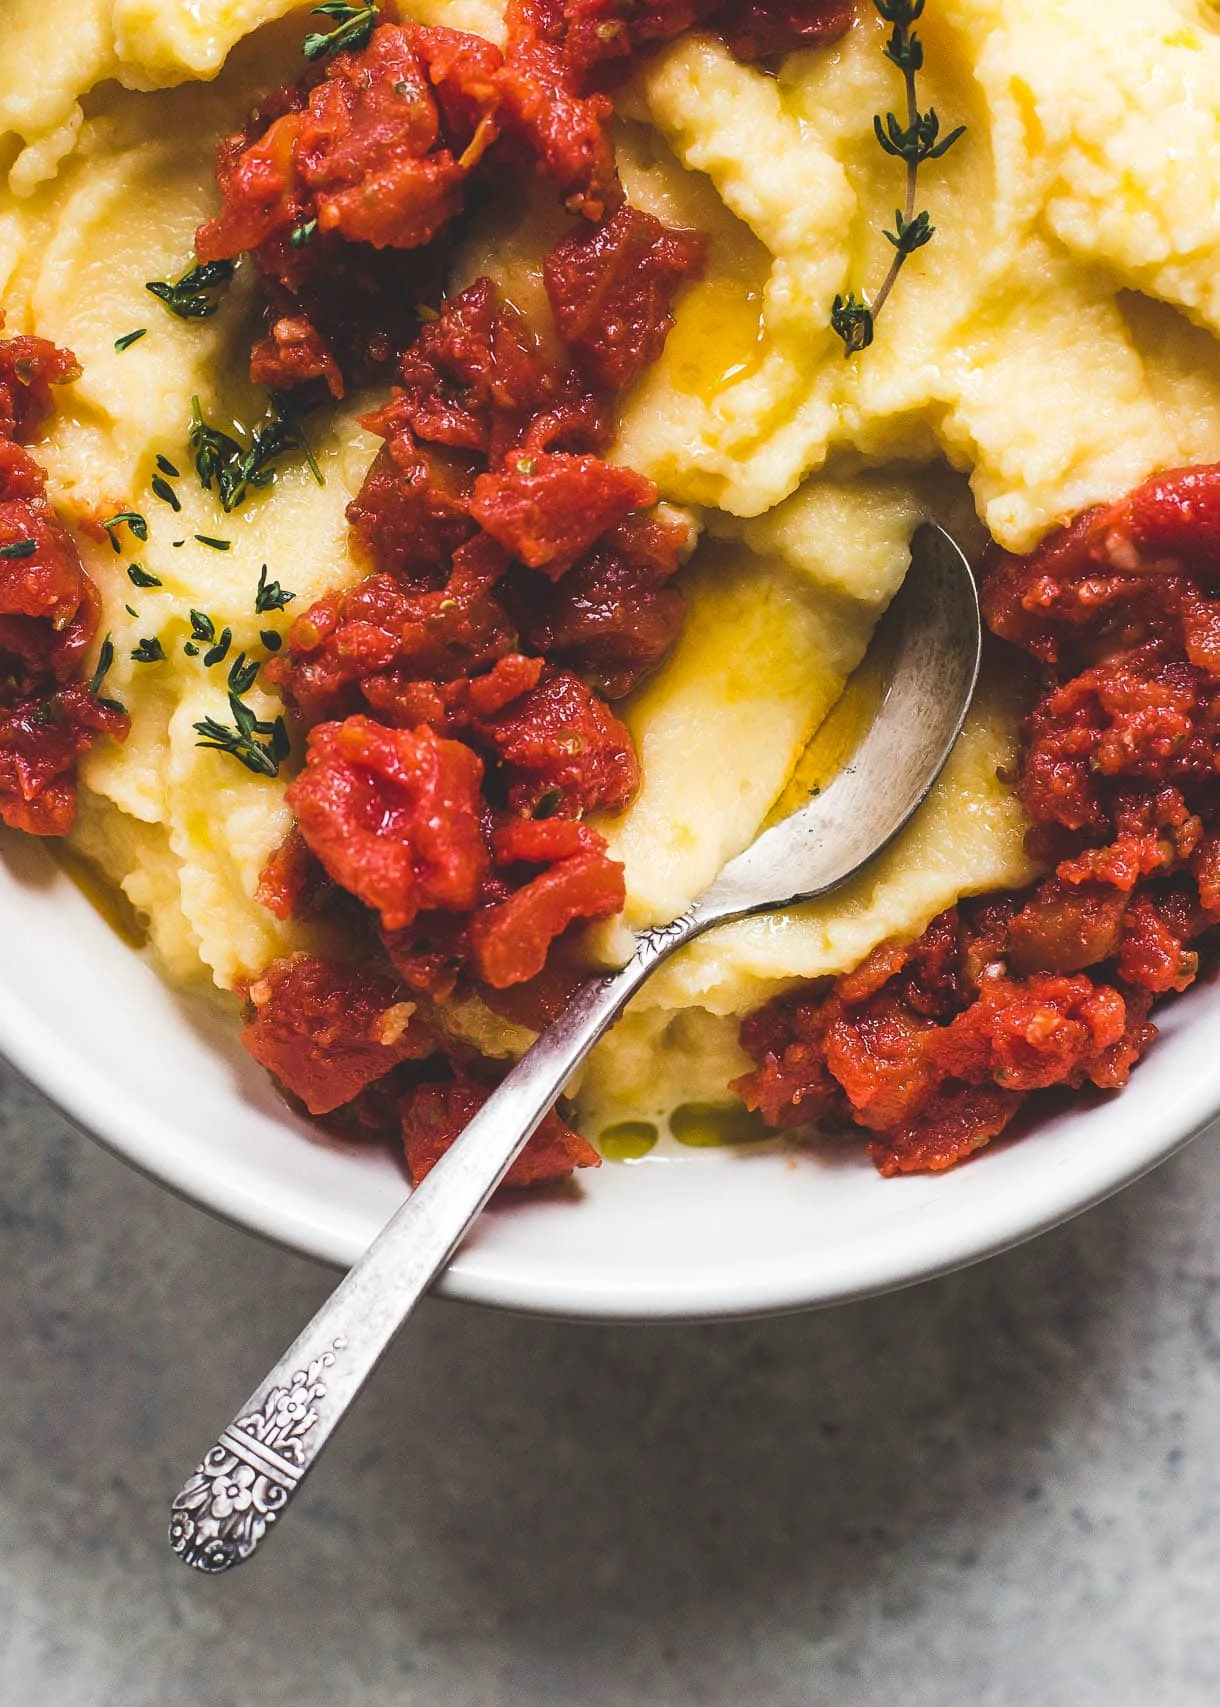 Whipped Rutabaga Mash with Quick Tomato Confit {grain-free, nut-free}